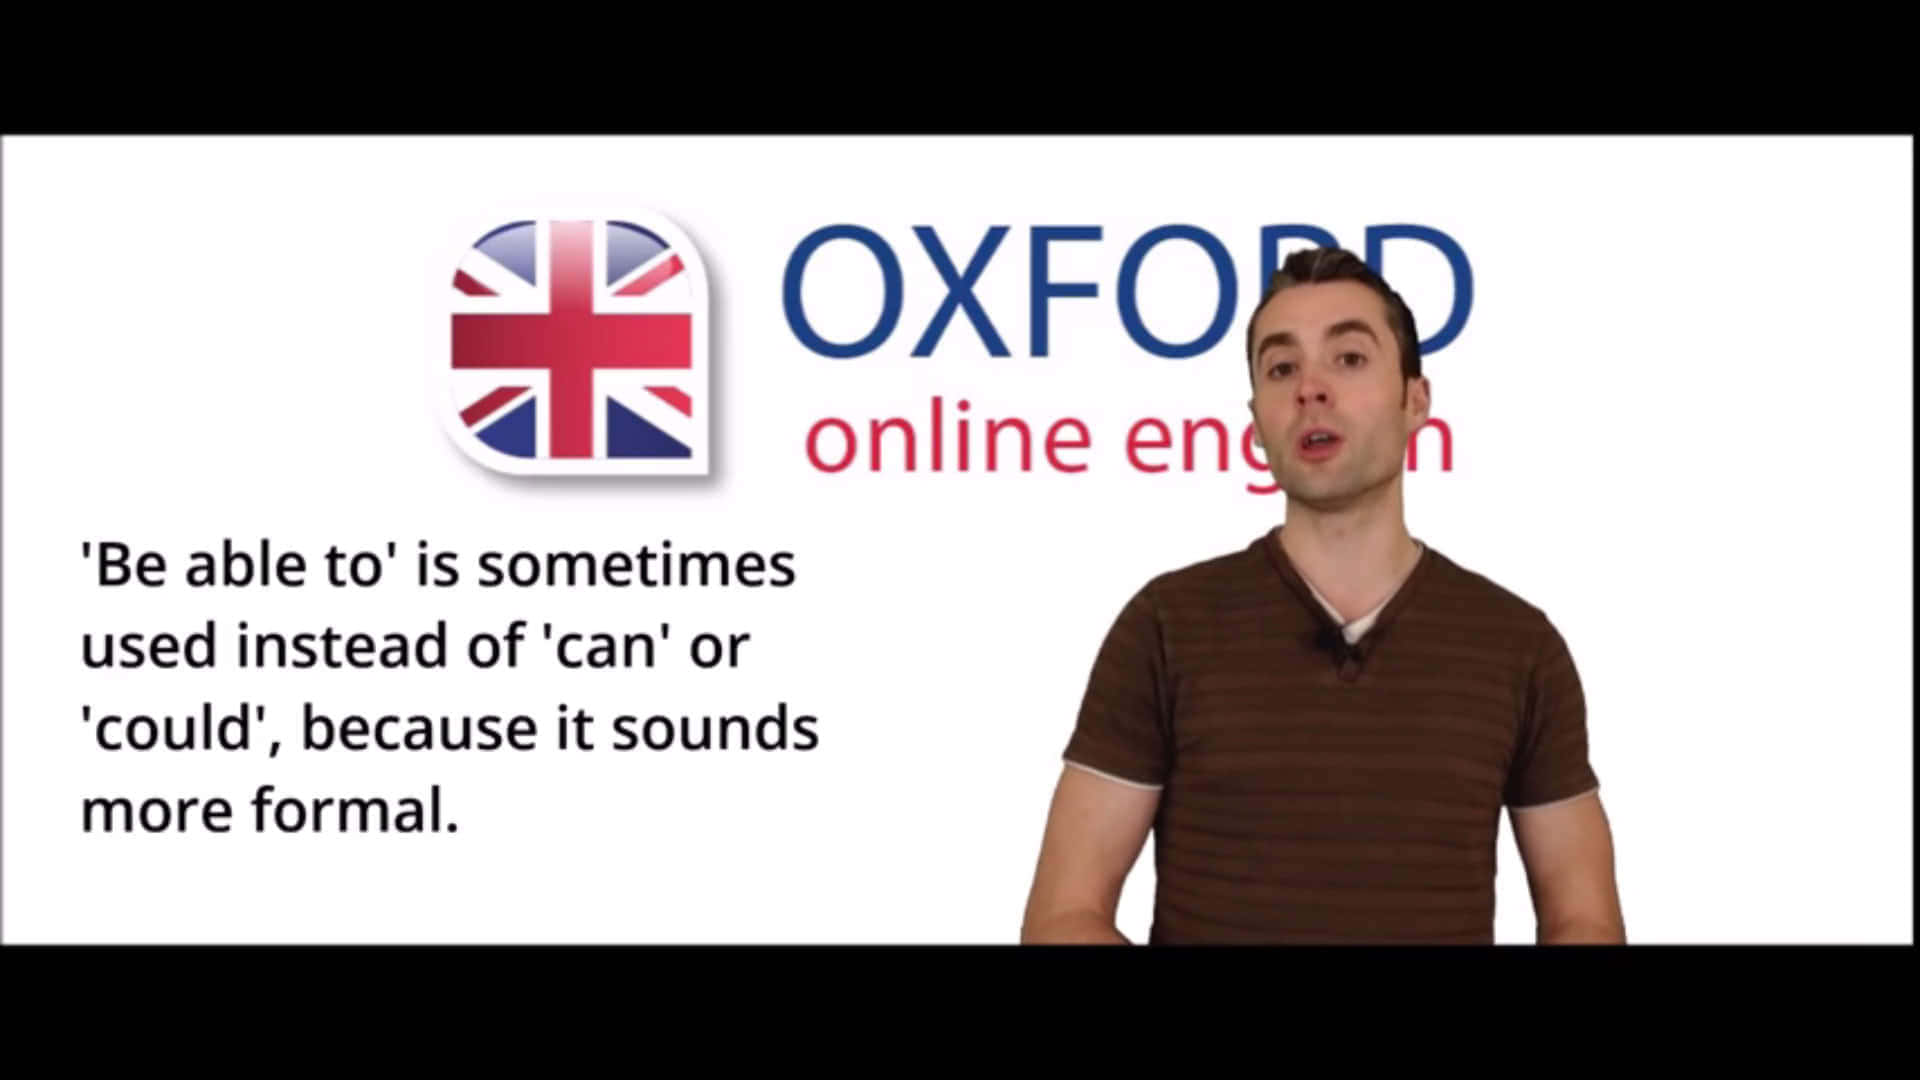 How To Use 'Can', 'Could' And 'Be Able To' (Oxford Online English